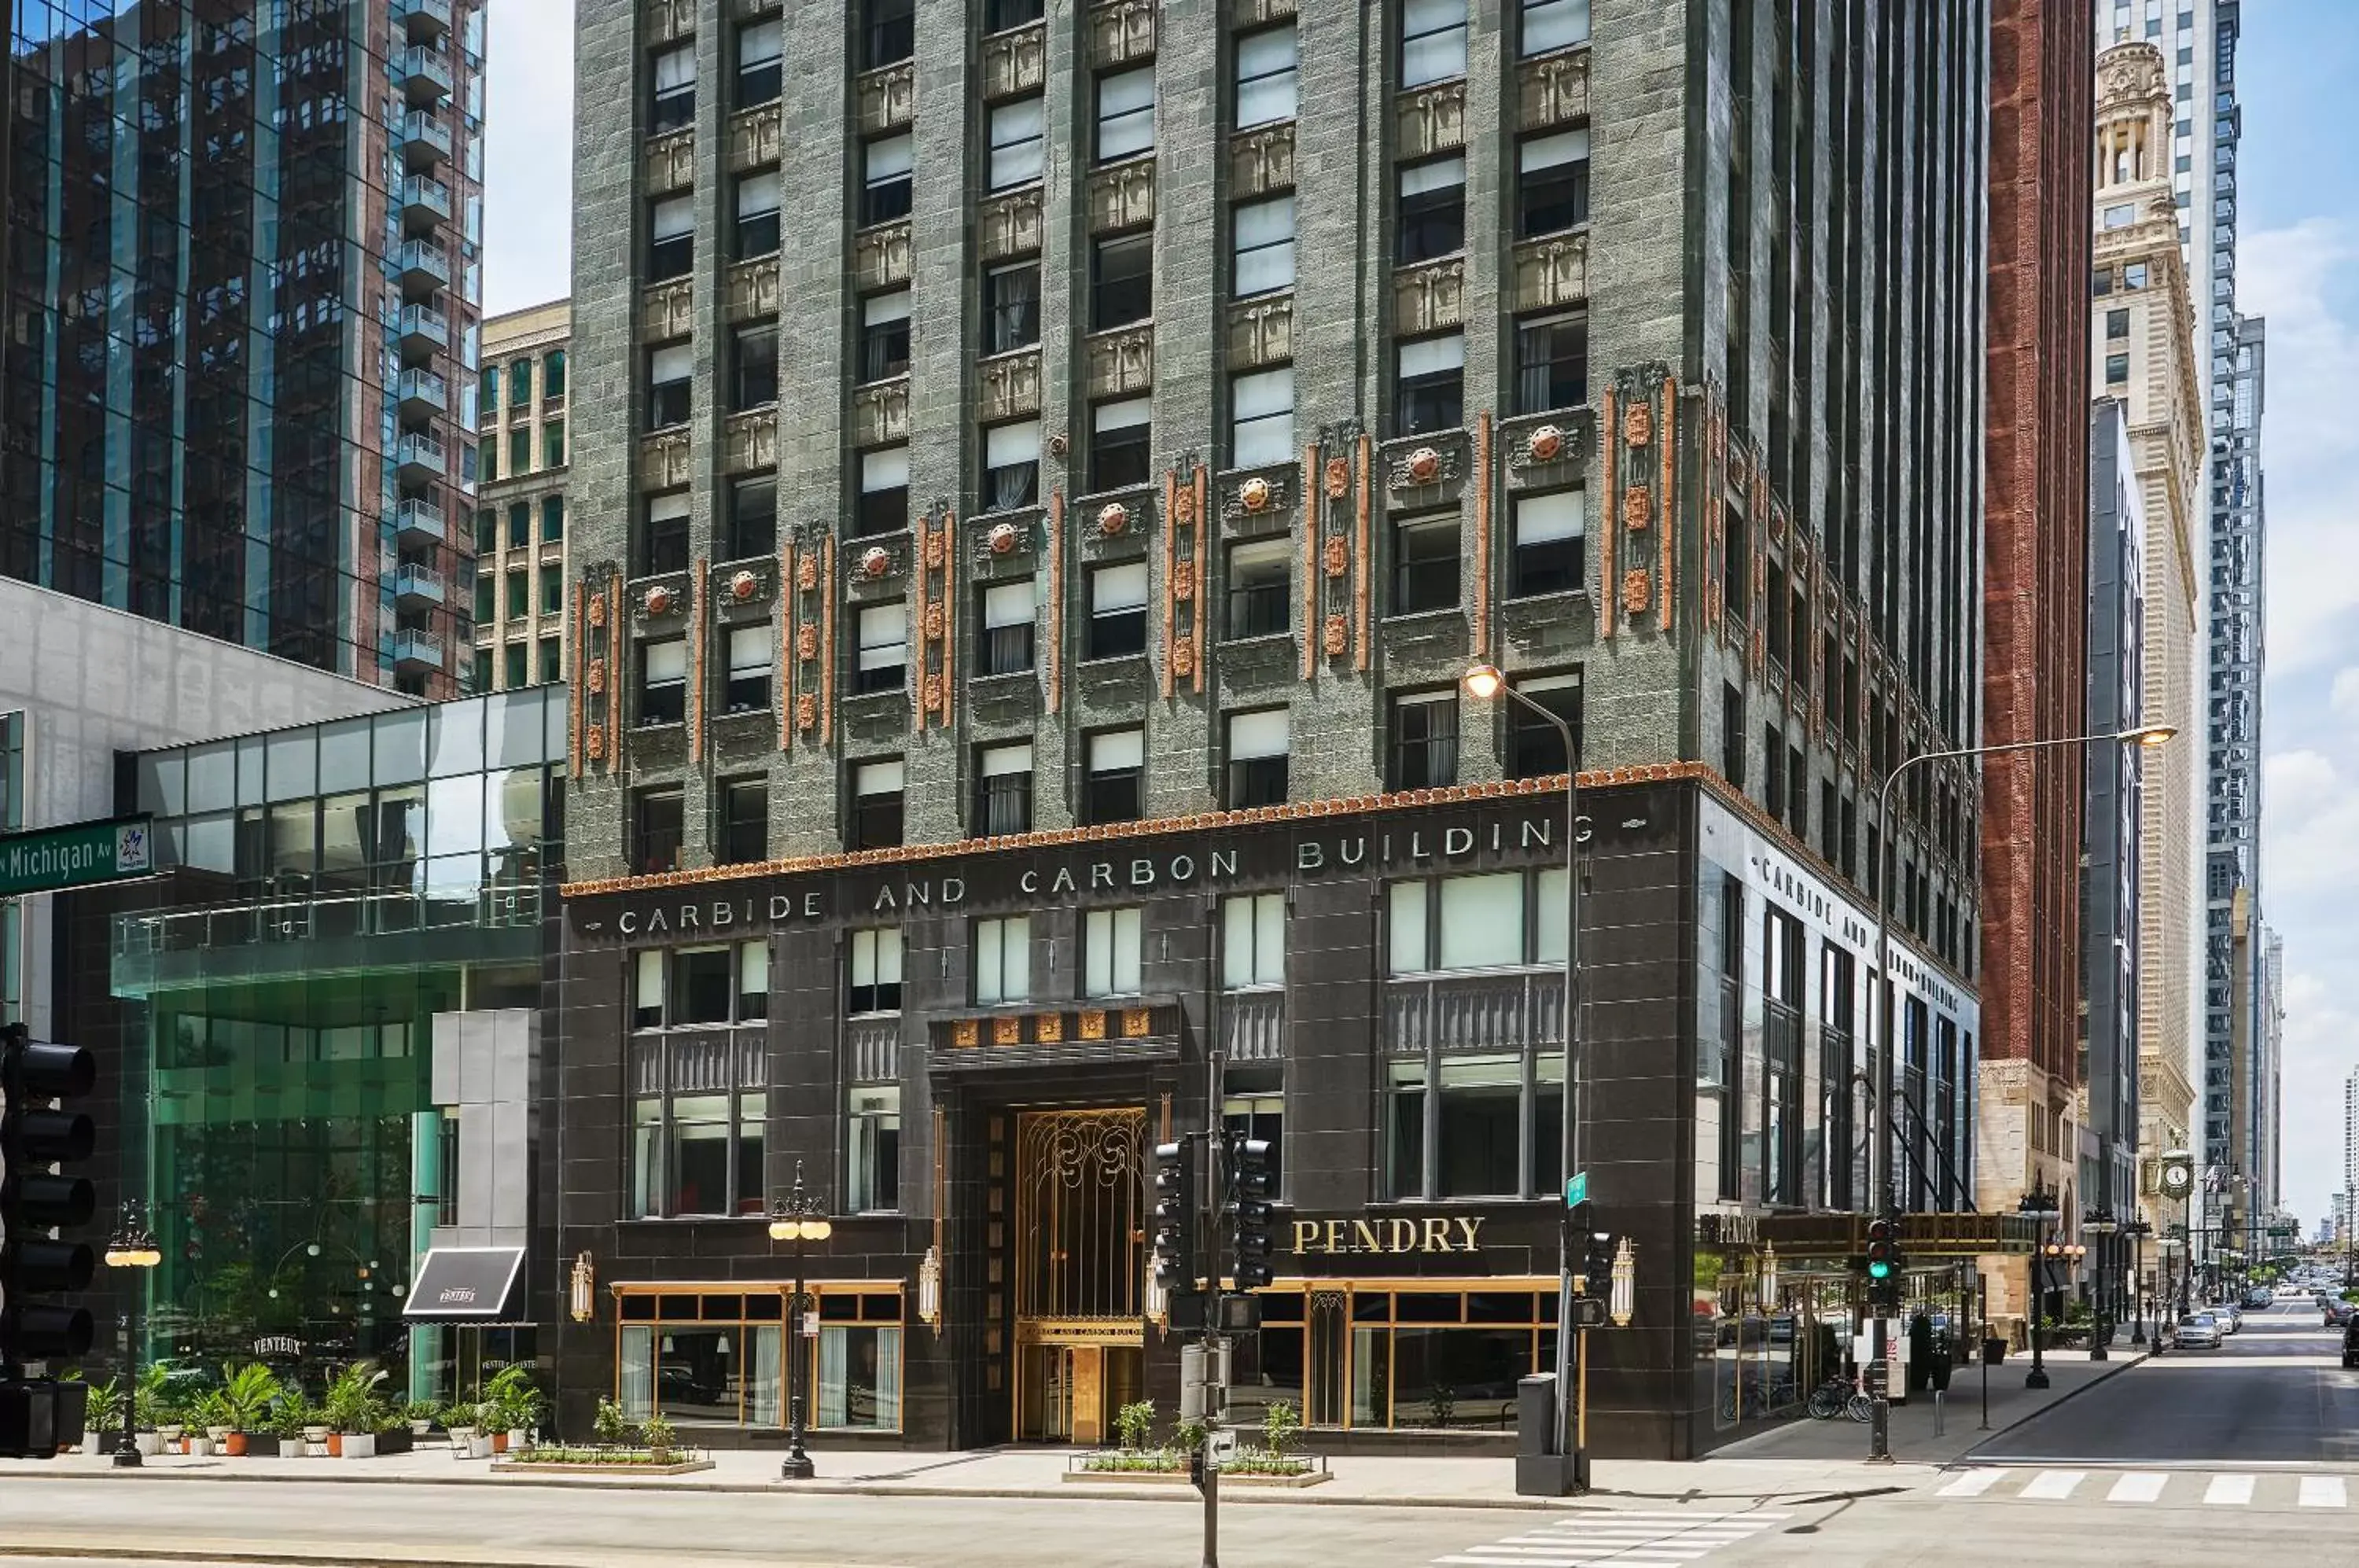 Property Building in Pendry Chicago